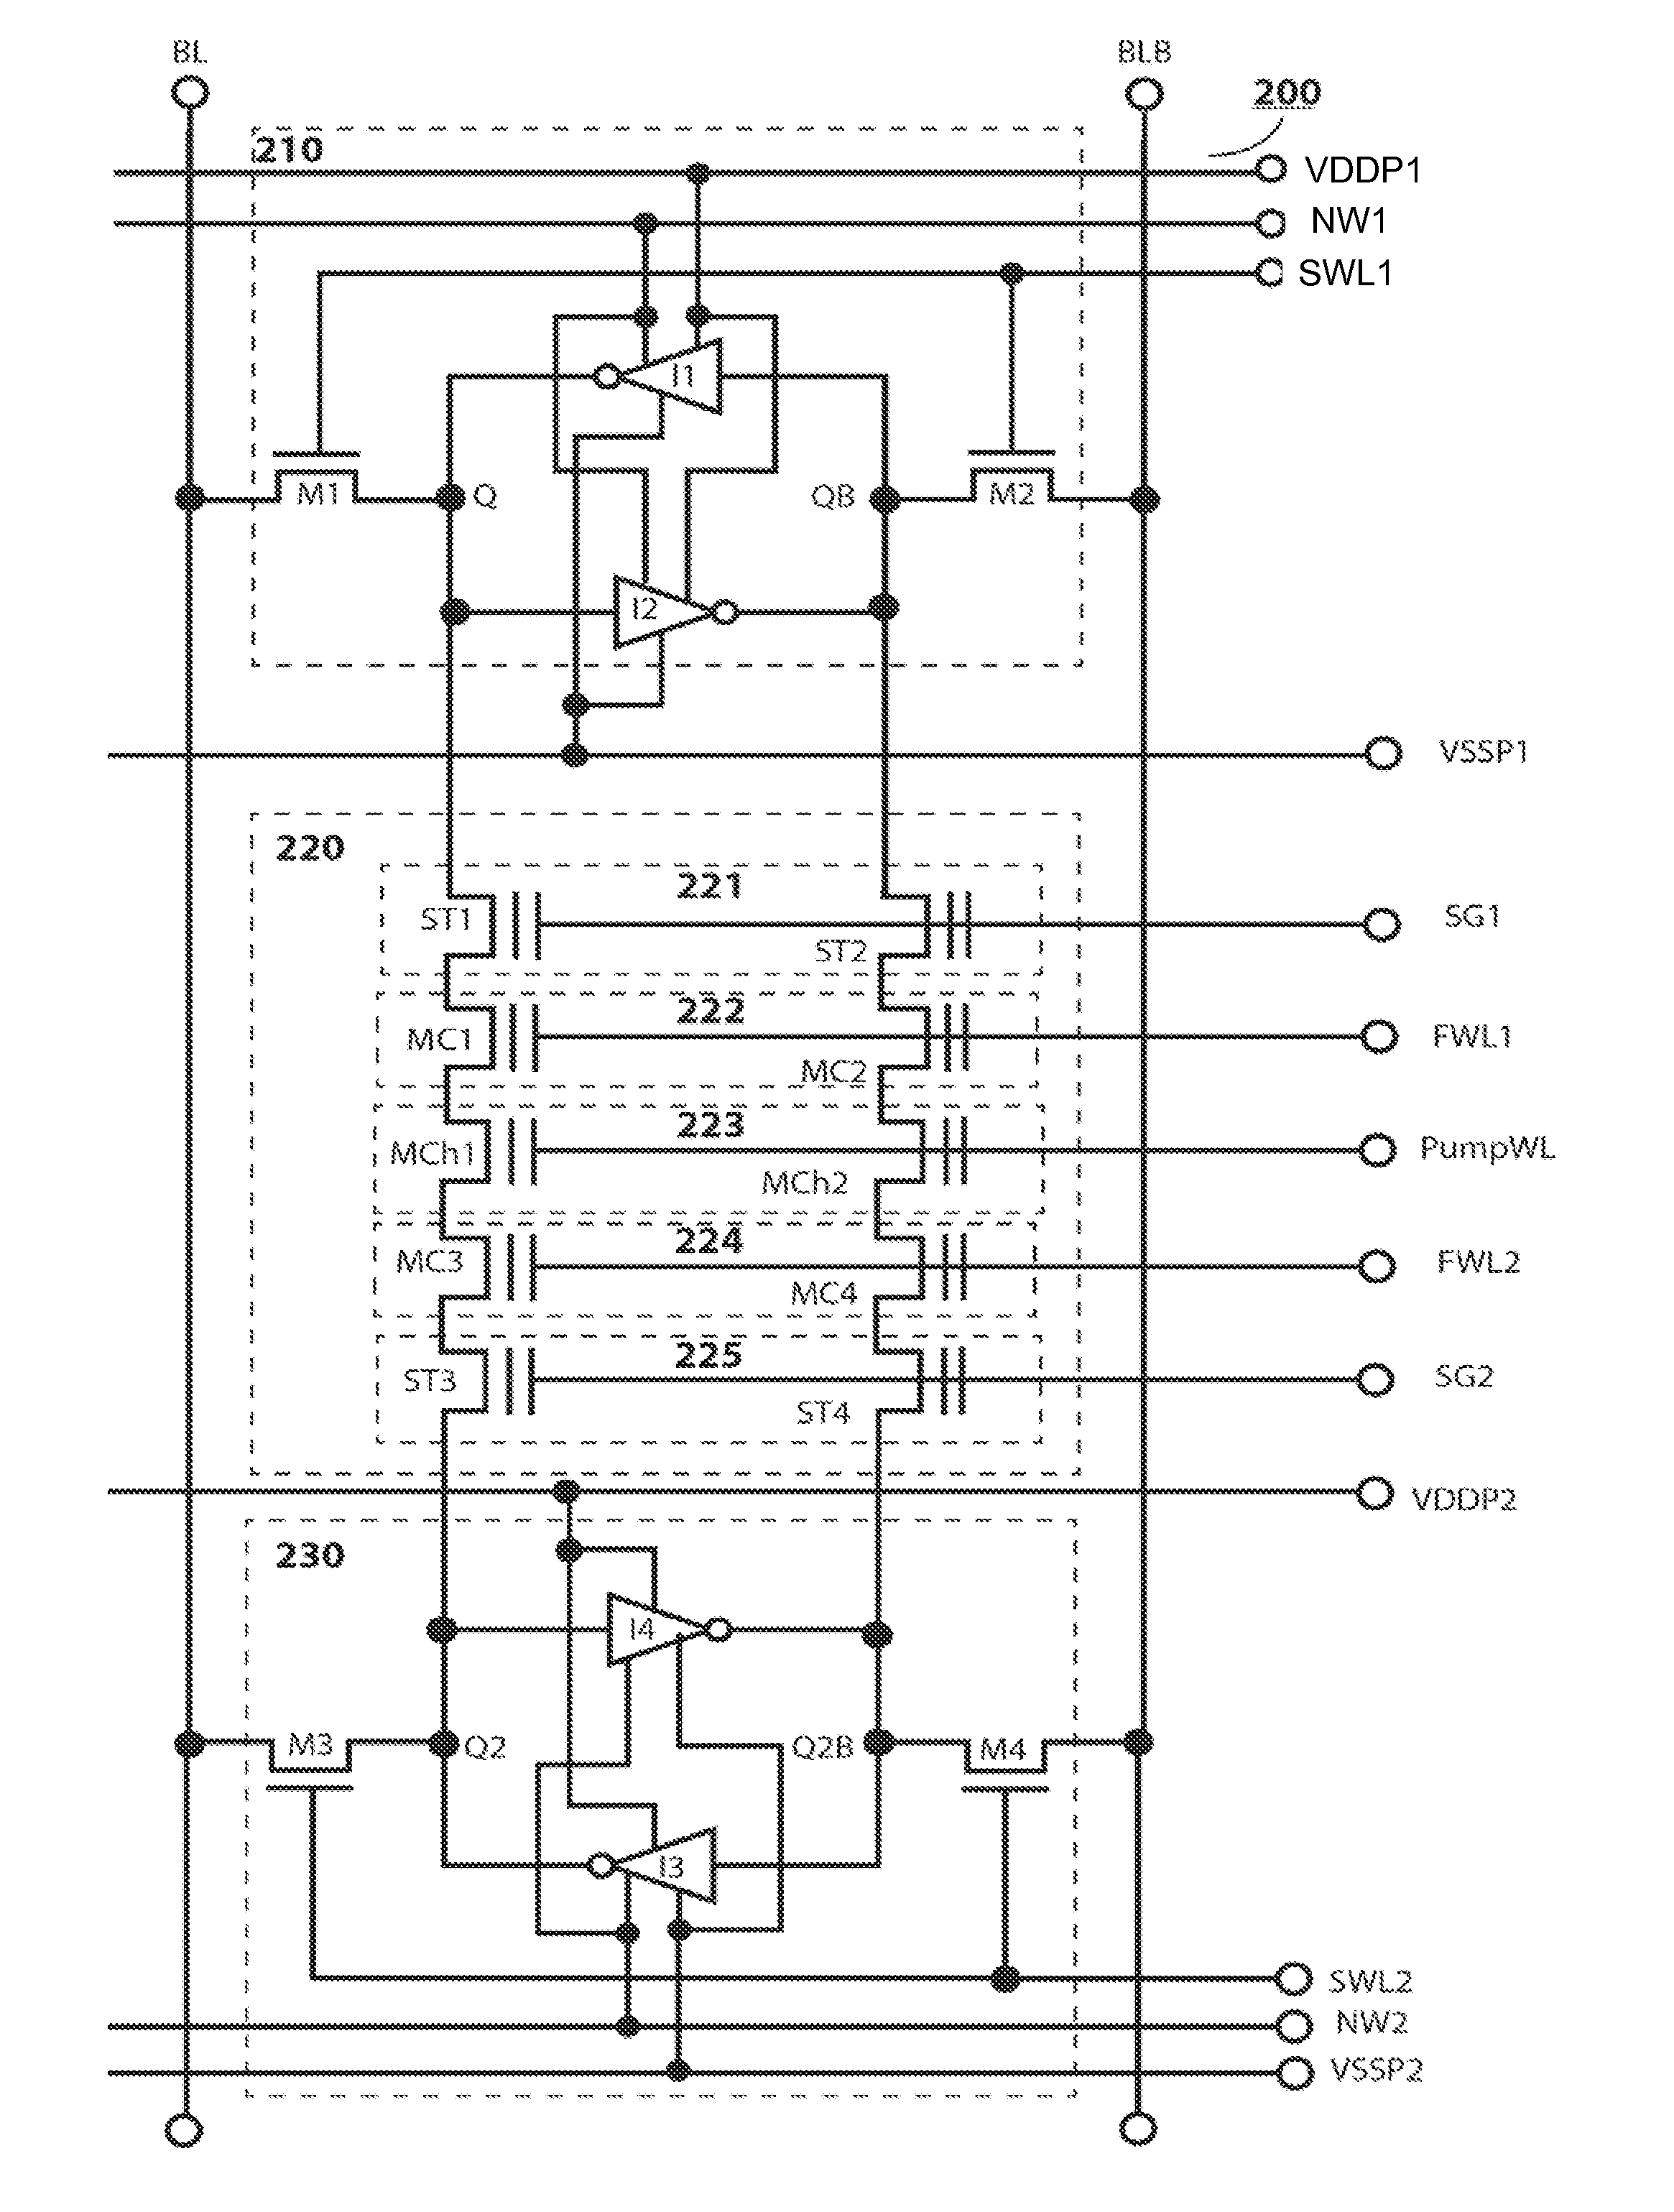 Nvsram cells with voltage flash charger